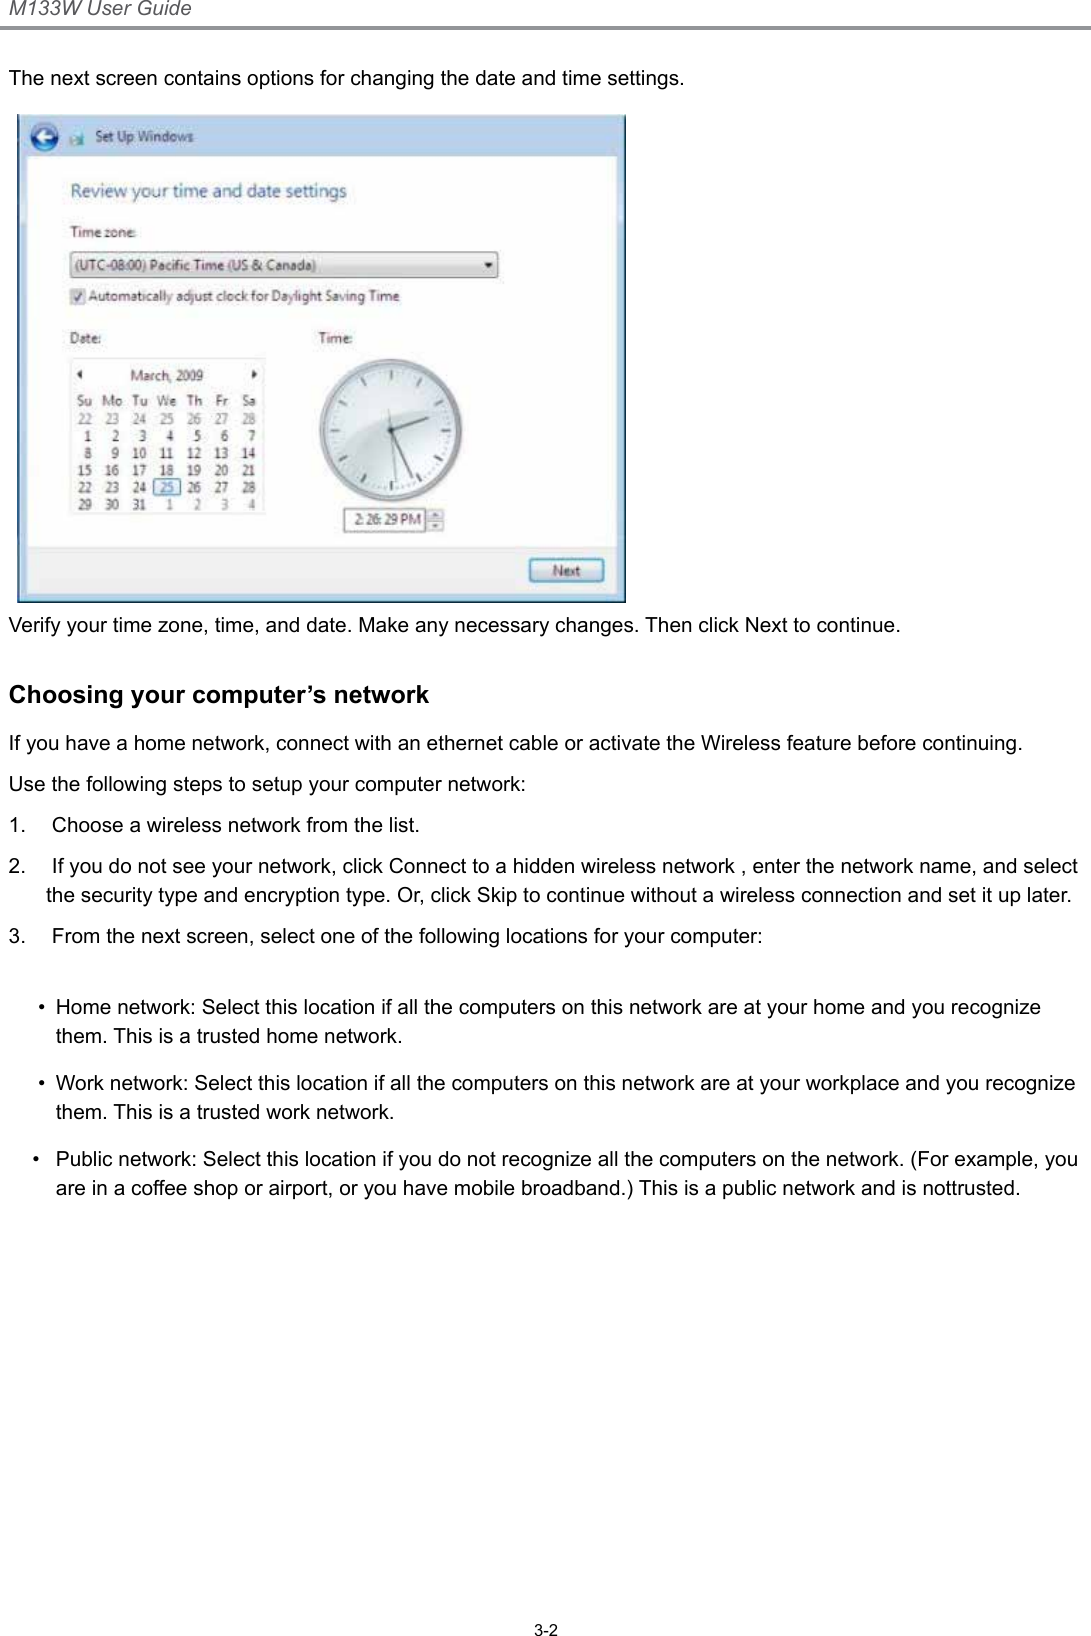 M133W User Guide3-2The next screen contains options for changing the date and time settings.Verify your time zone, time, and date. Make any necessary changes. Then click Next to continue.Choosing your computer’s networkIf you have a home network, connect with an ethernet cable or activate the Wireless feature before continuing.Use the following steps to setup your computer network:1.   Choose a wireless network from the list.2.   If you do not see your network, click Connect to a hidden wireless network , enter the network name, and select the security type and encryption type. Or, click Skip to continue without a wireless connection and set it up later.3.   From the next screen, select one of the following locations for your computer: •  Home network: Select this location if all the computers on this network are at your home and you recognize them. This is a trusted home network.•  Work network: Select this location if all the computers on this network are at your workplace and you recognize them. This is a trusted work network.•  Public network: Select this location if you do not recognize all the computers on the network. (For example, you are in a coffee shop or airport, or you have mobile broadband.) This is a public network and is nottrusted. 